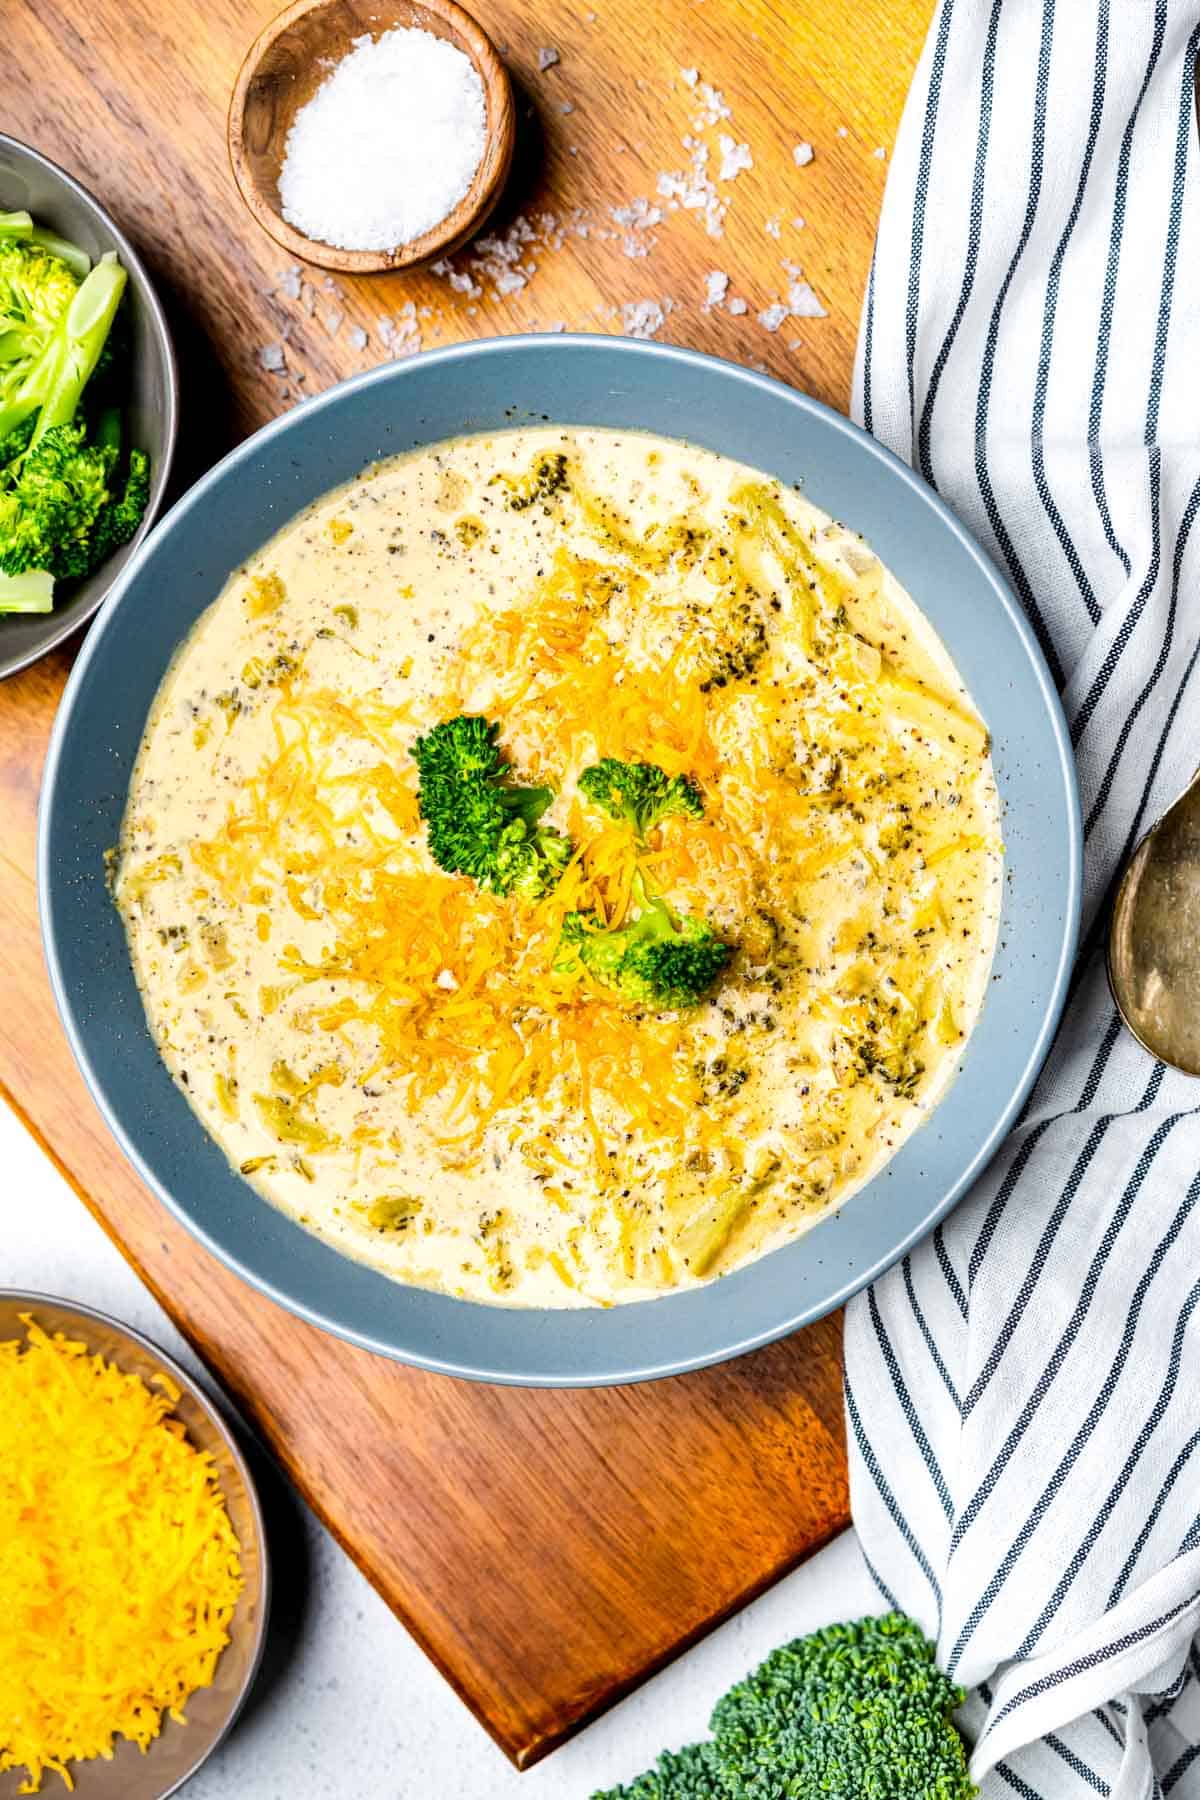 Keto Broccoli Cheese Soup in a blue bowl on a wooden cutting board